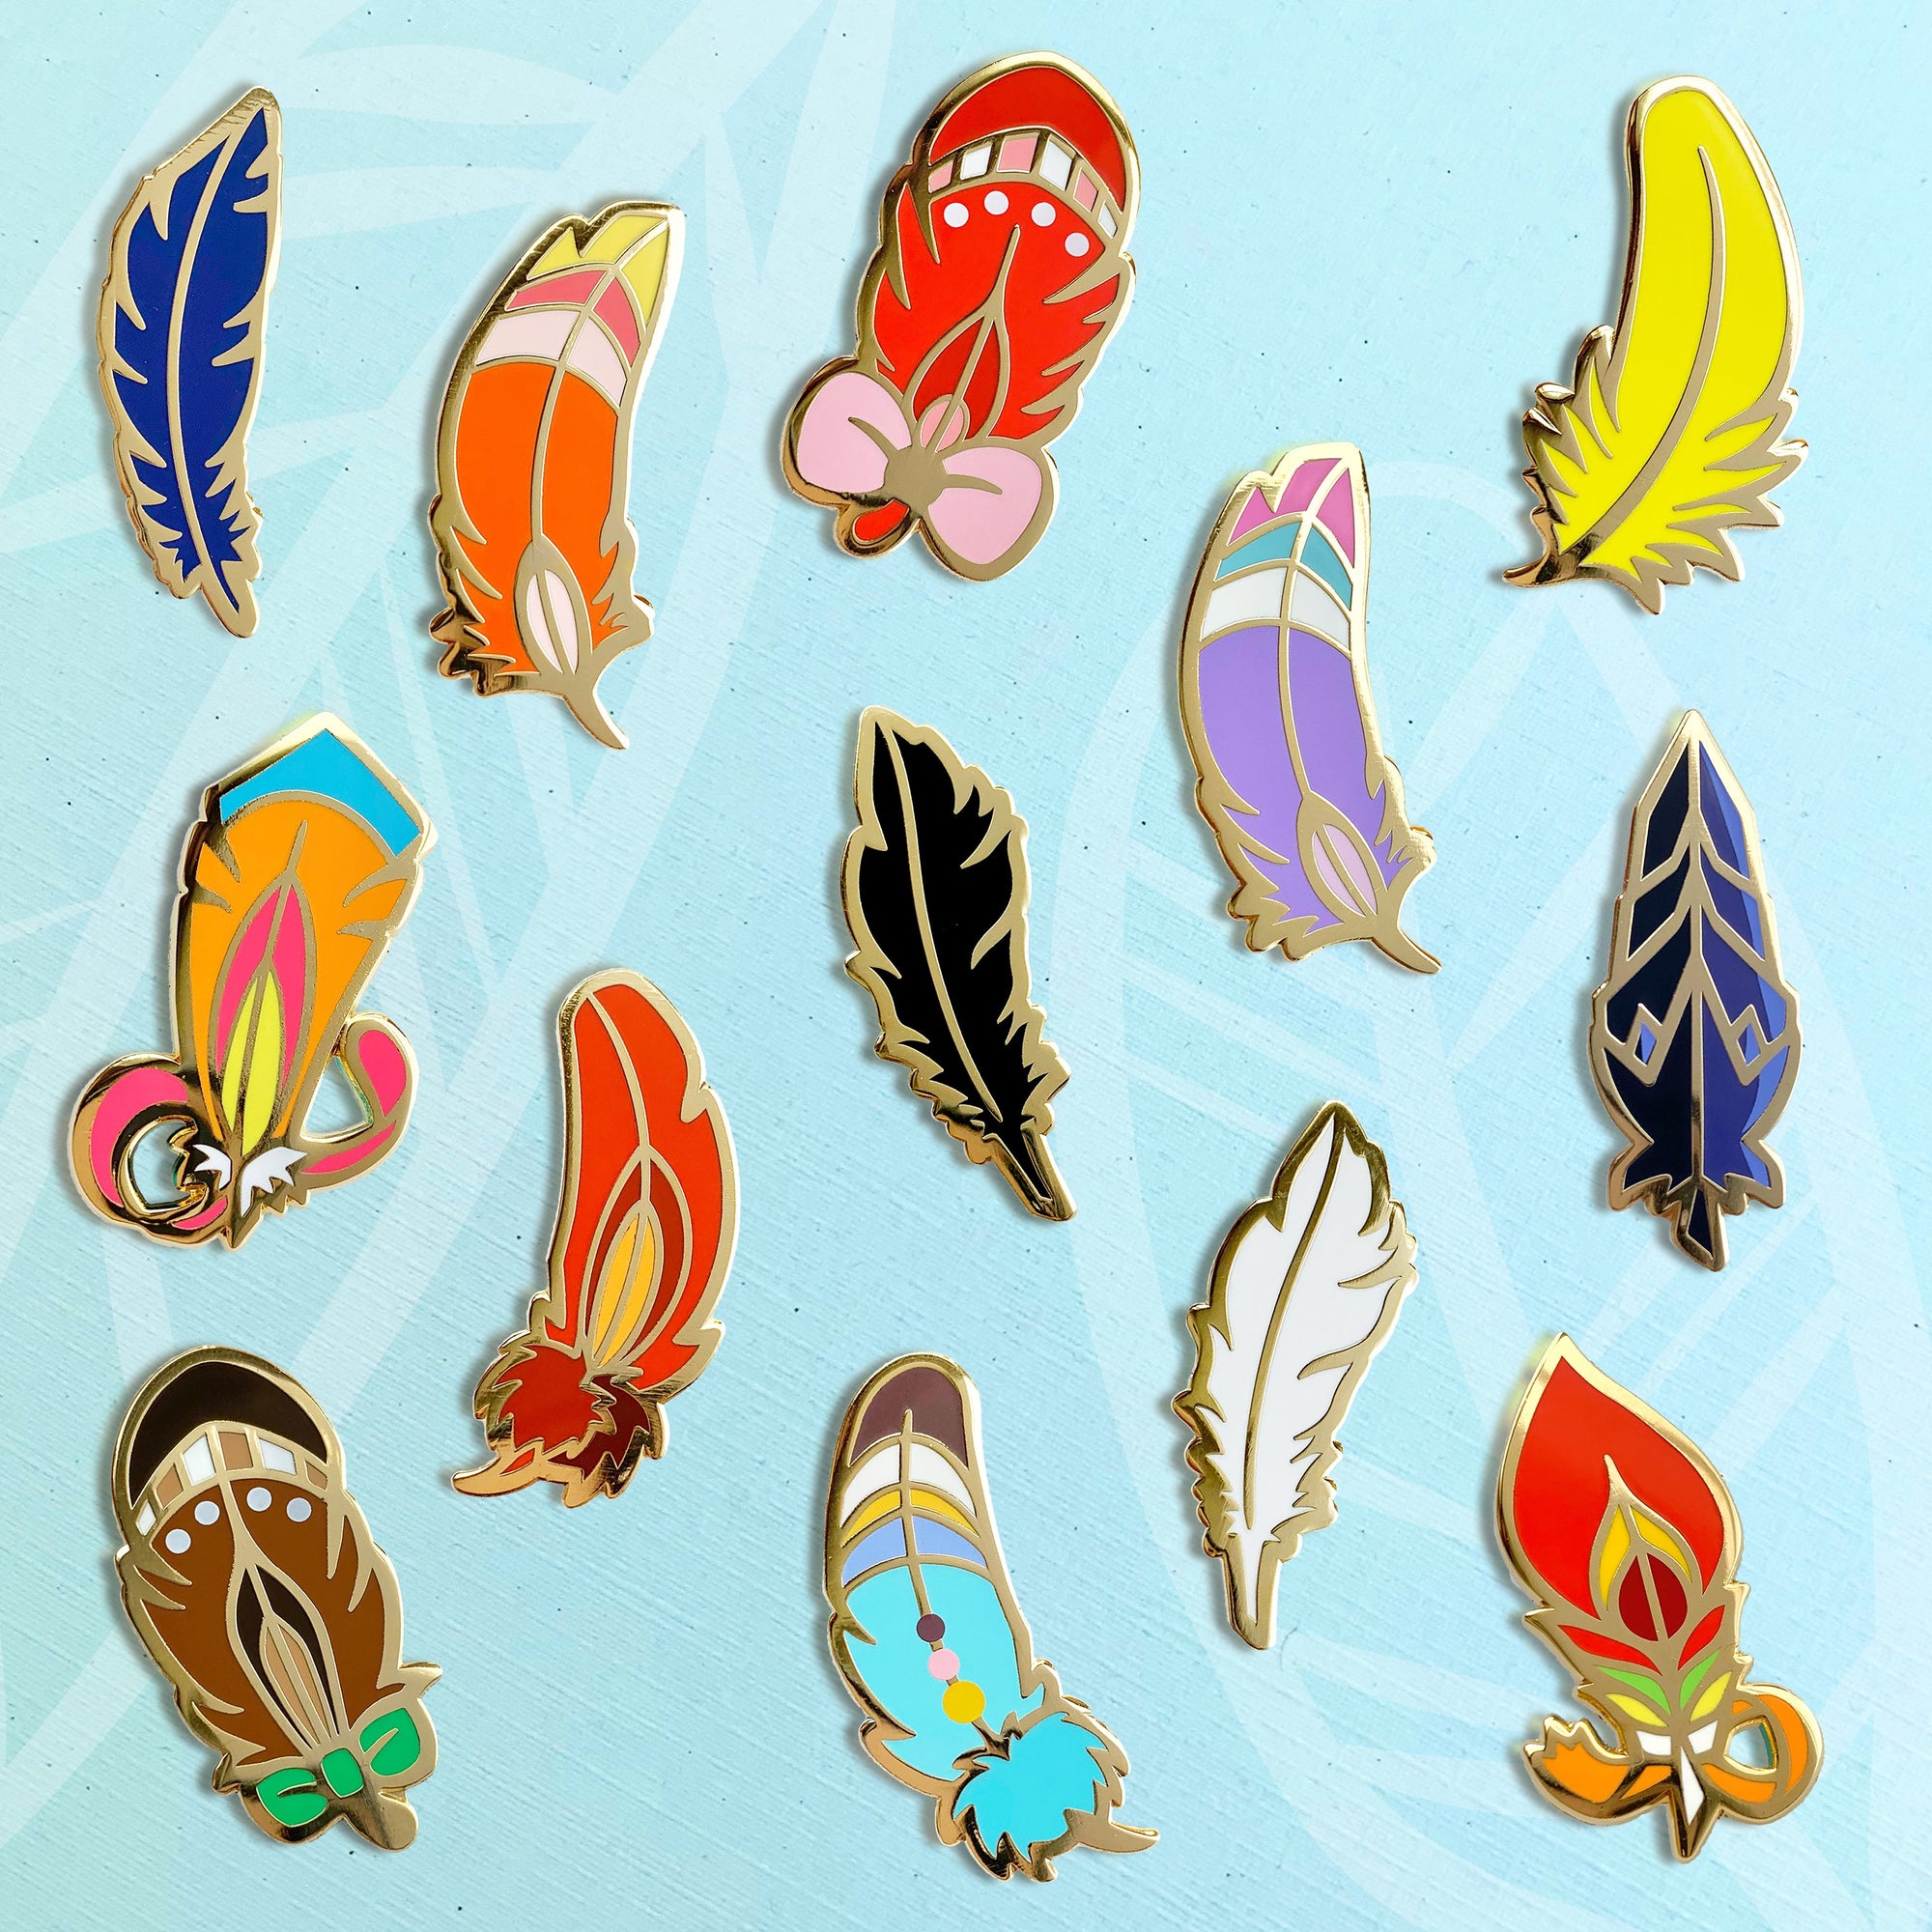 Celeste Feather Enamel Pin by Shumi Collective